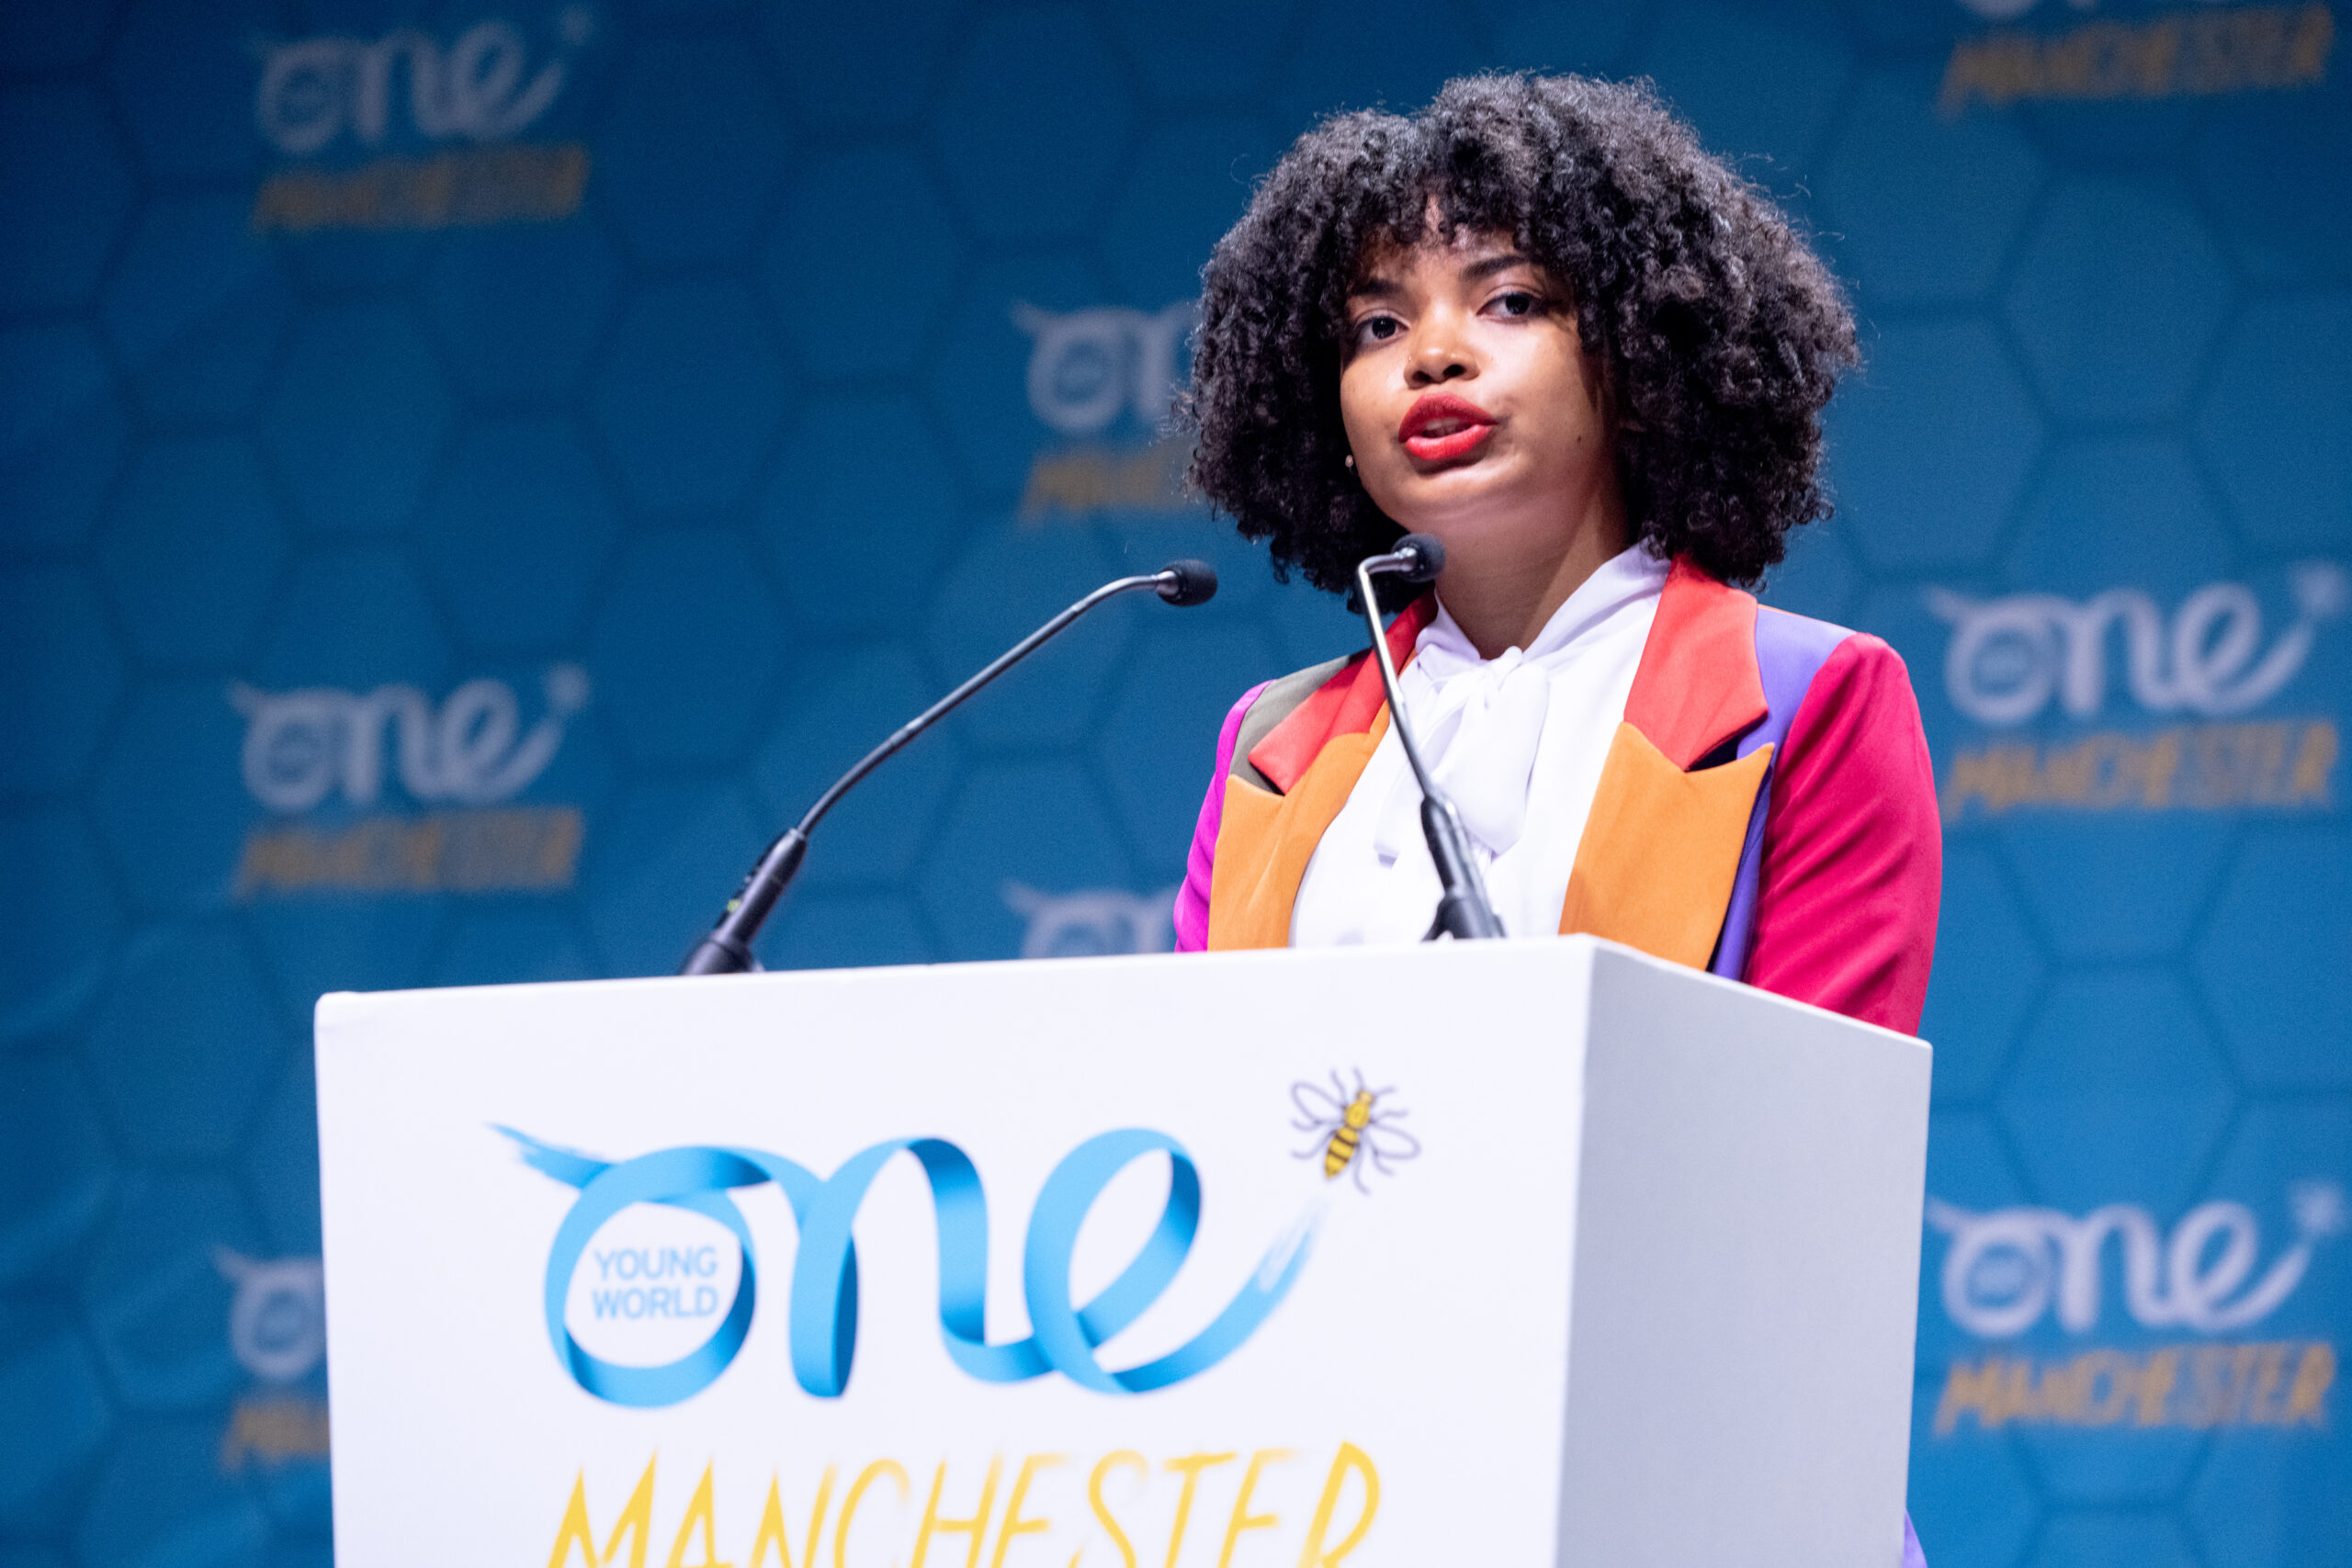 One Young World takes place in Manchester